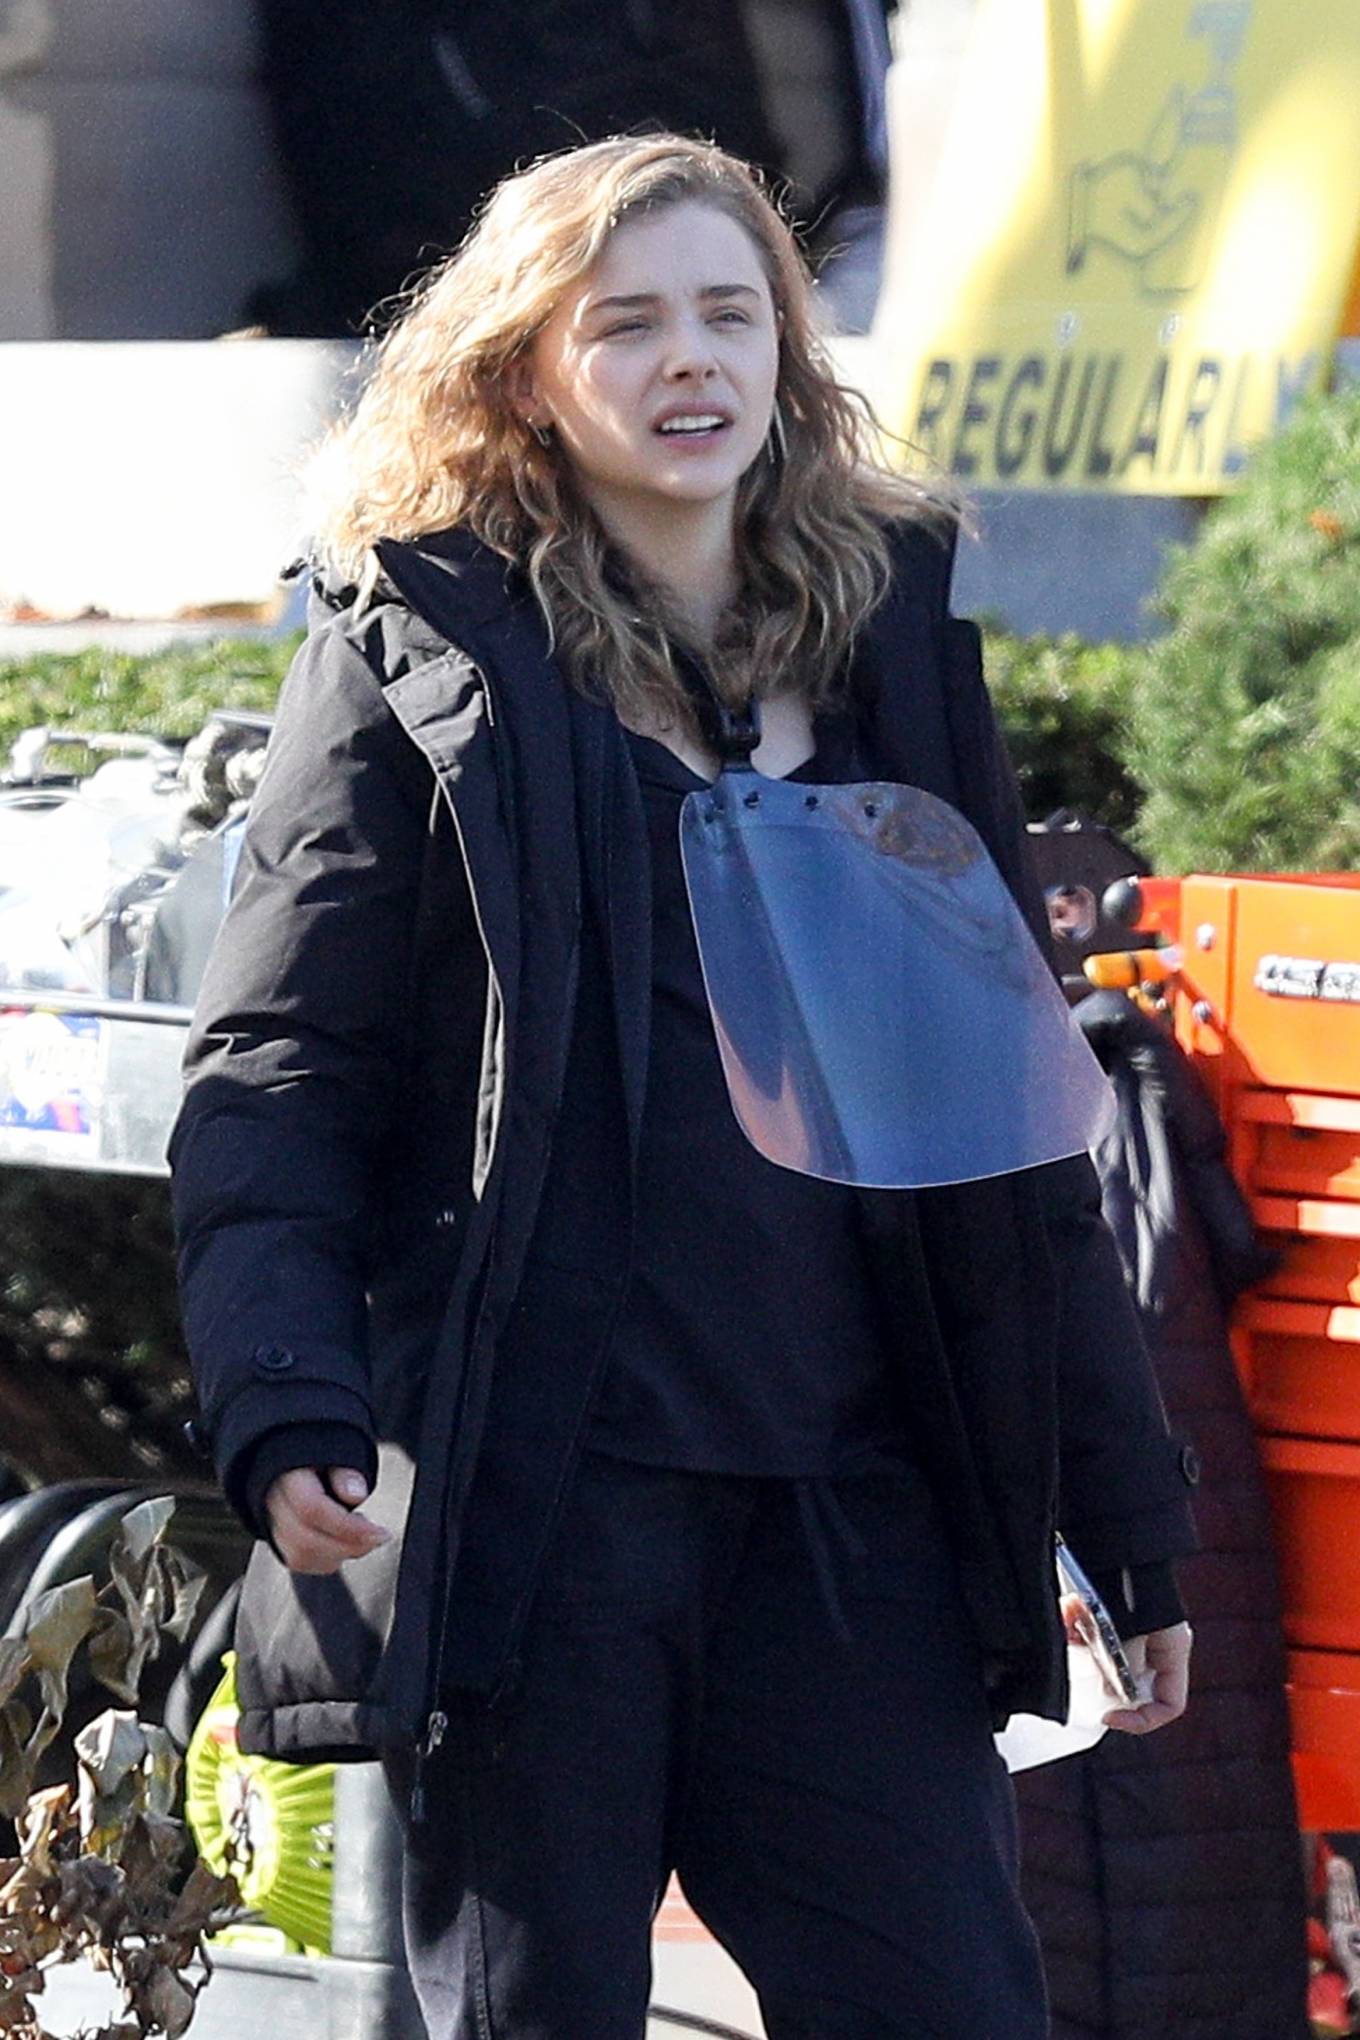 Android’ Filming Boston Moretz Chloe – ‘other Grace in